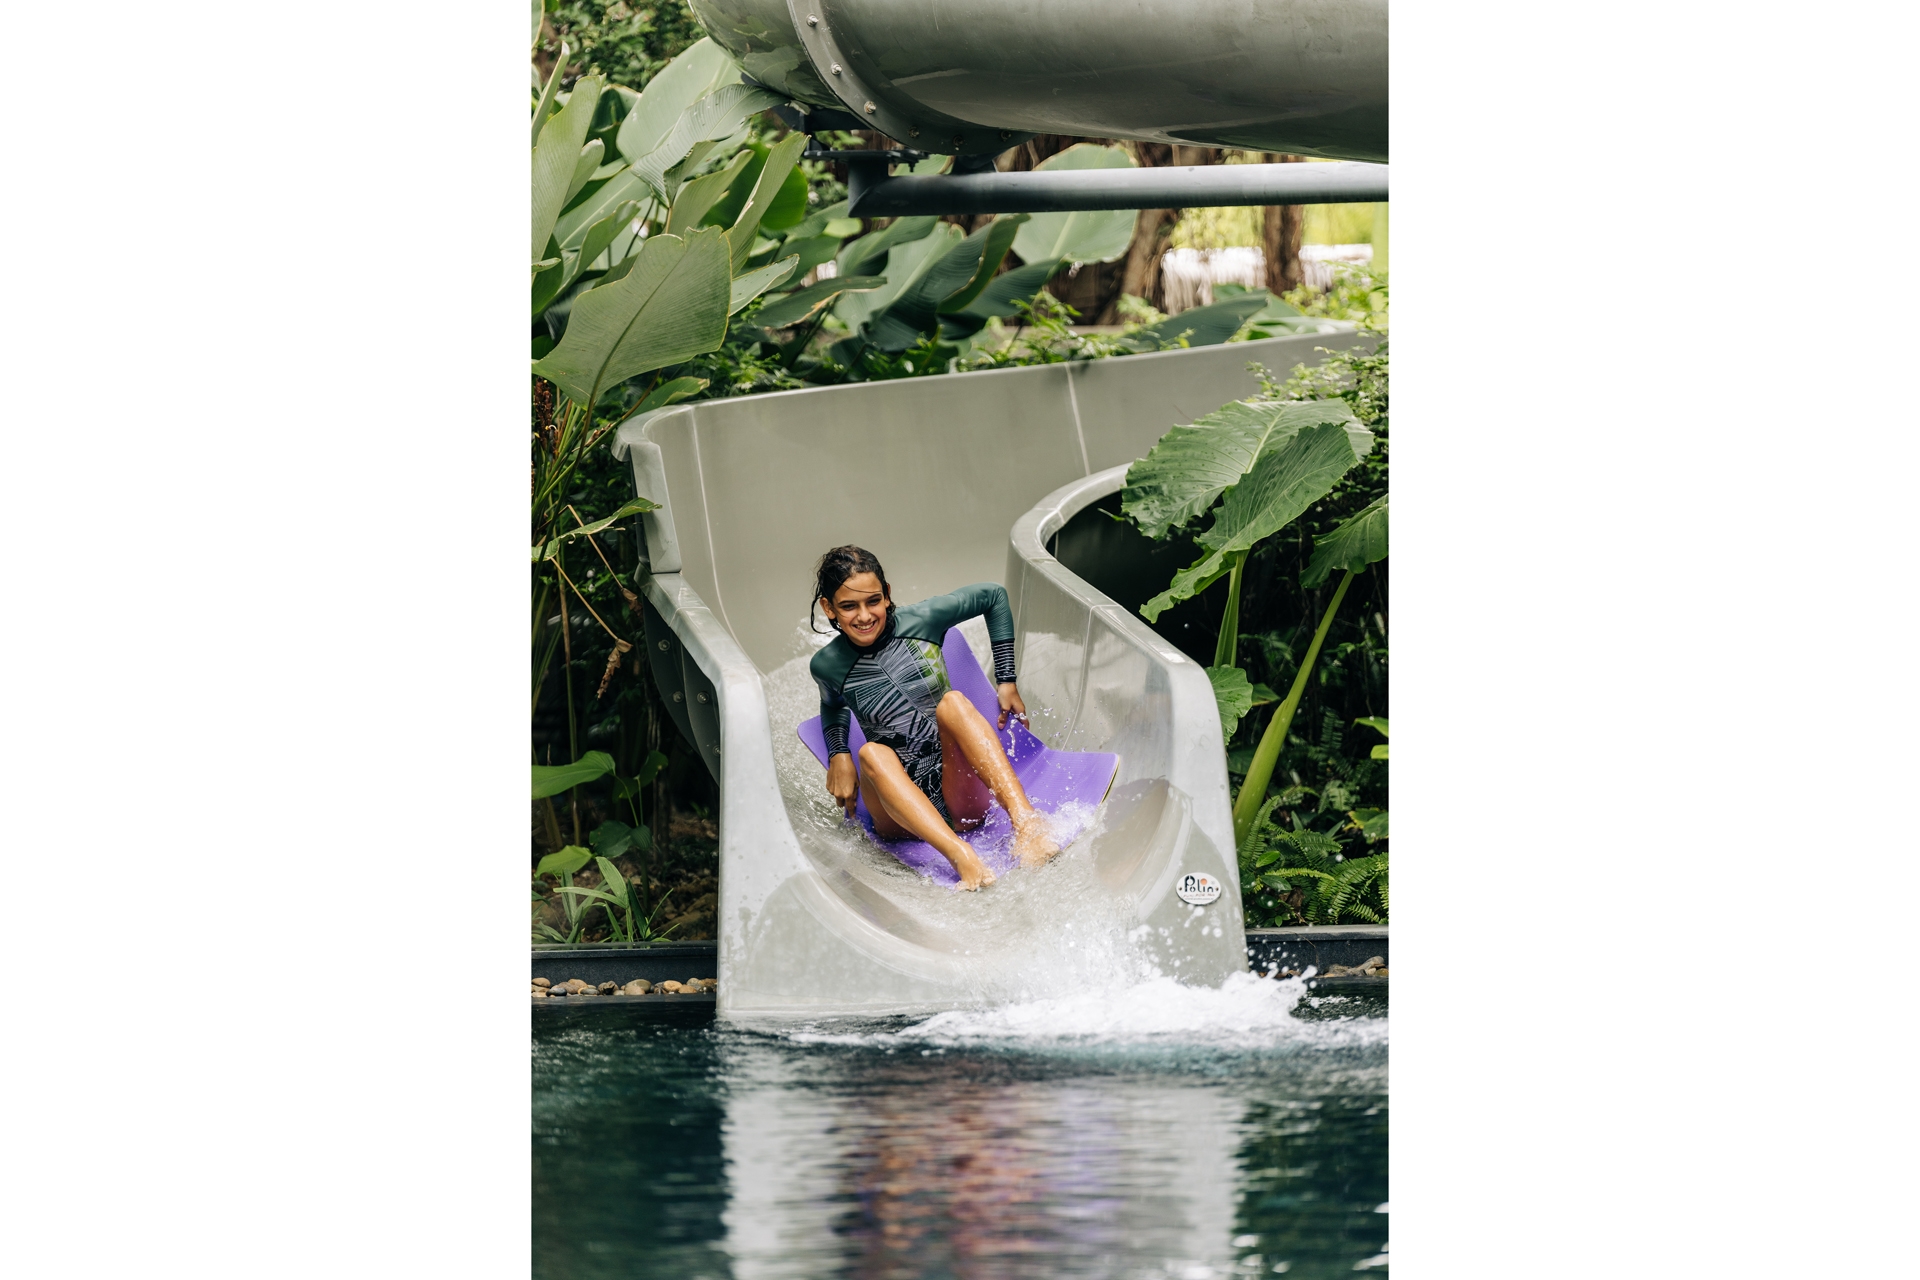 A child on a waterslide